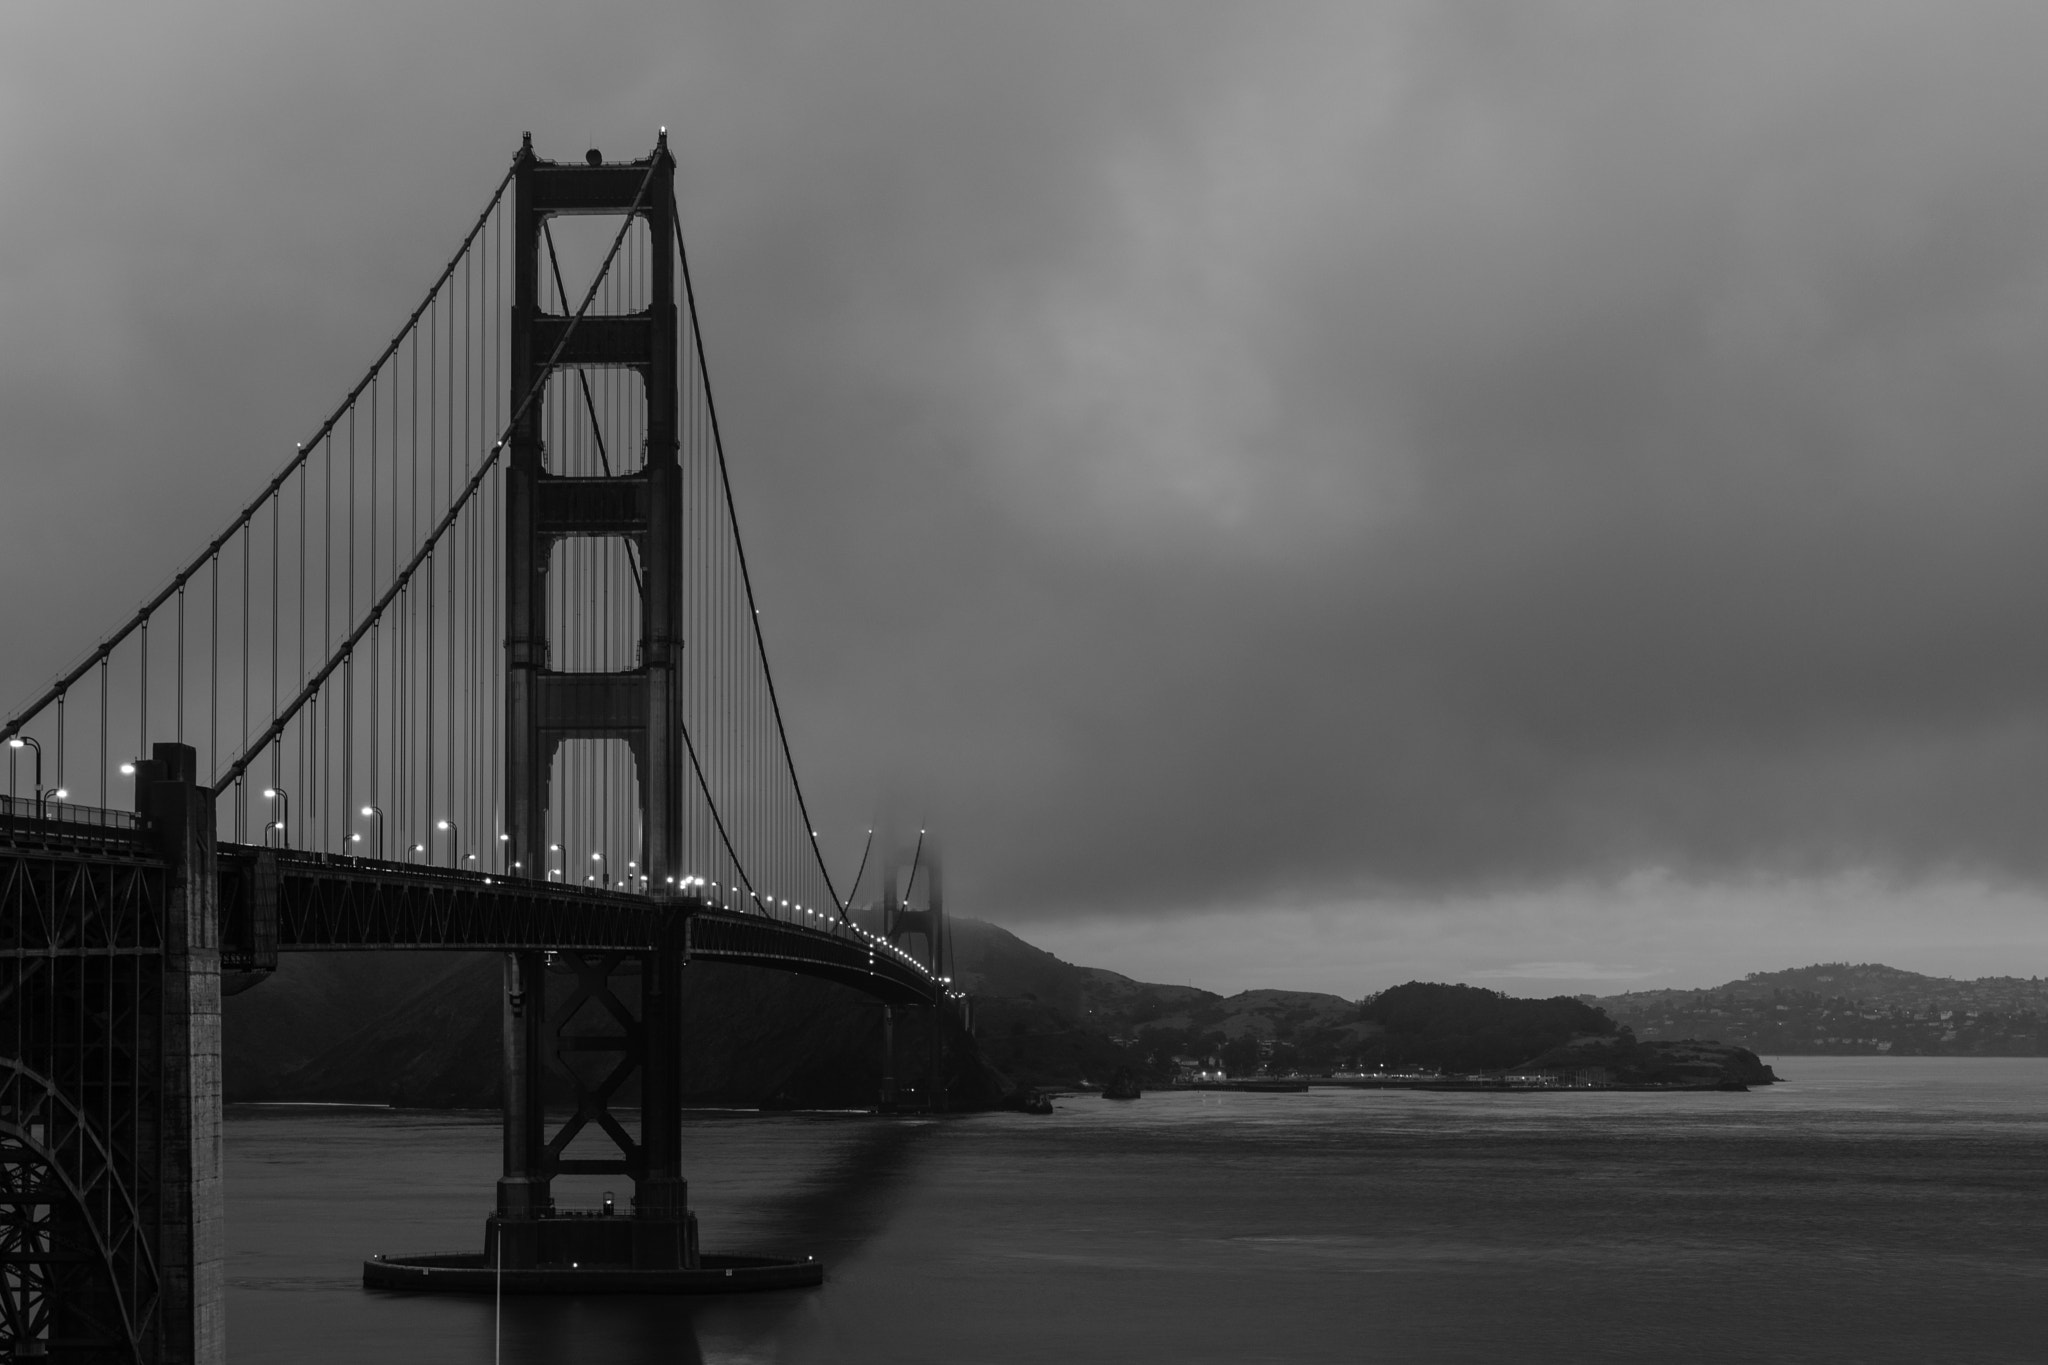 Nikon D3300 + Sigma 17-70mm F2.8-4 DC Macro OS HSM | C sample photo. Golden gate in the morning fog photography